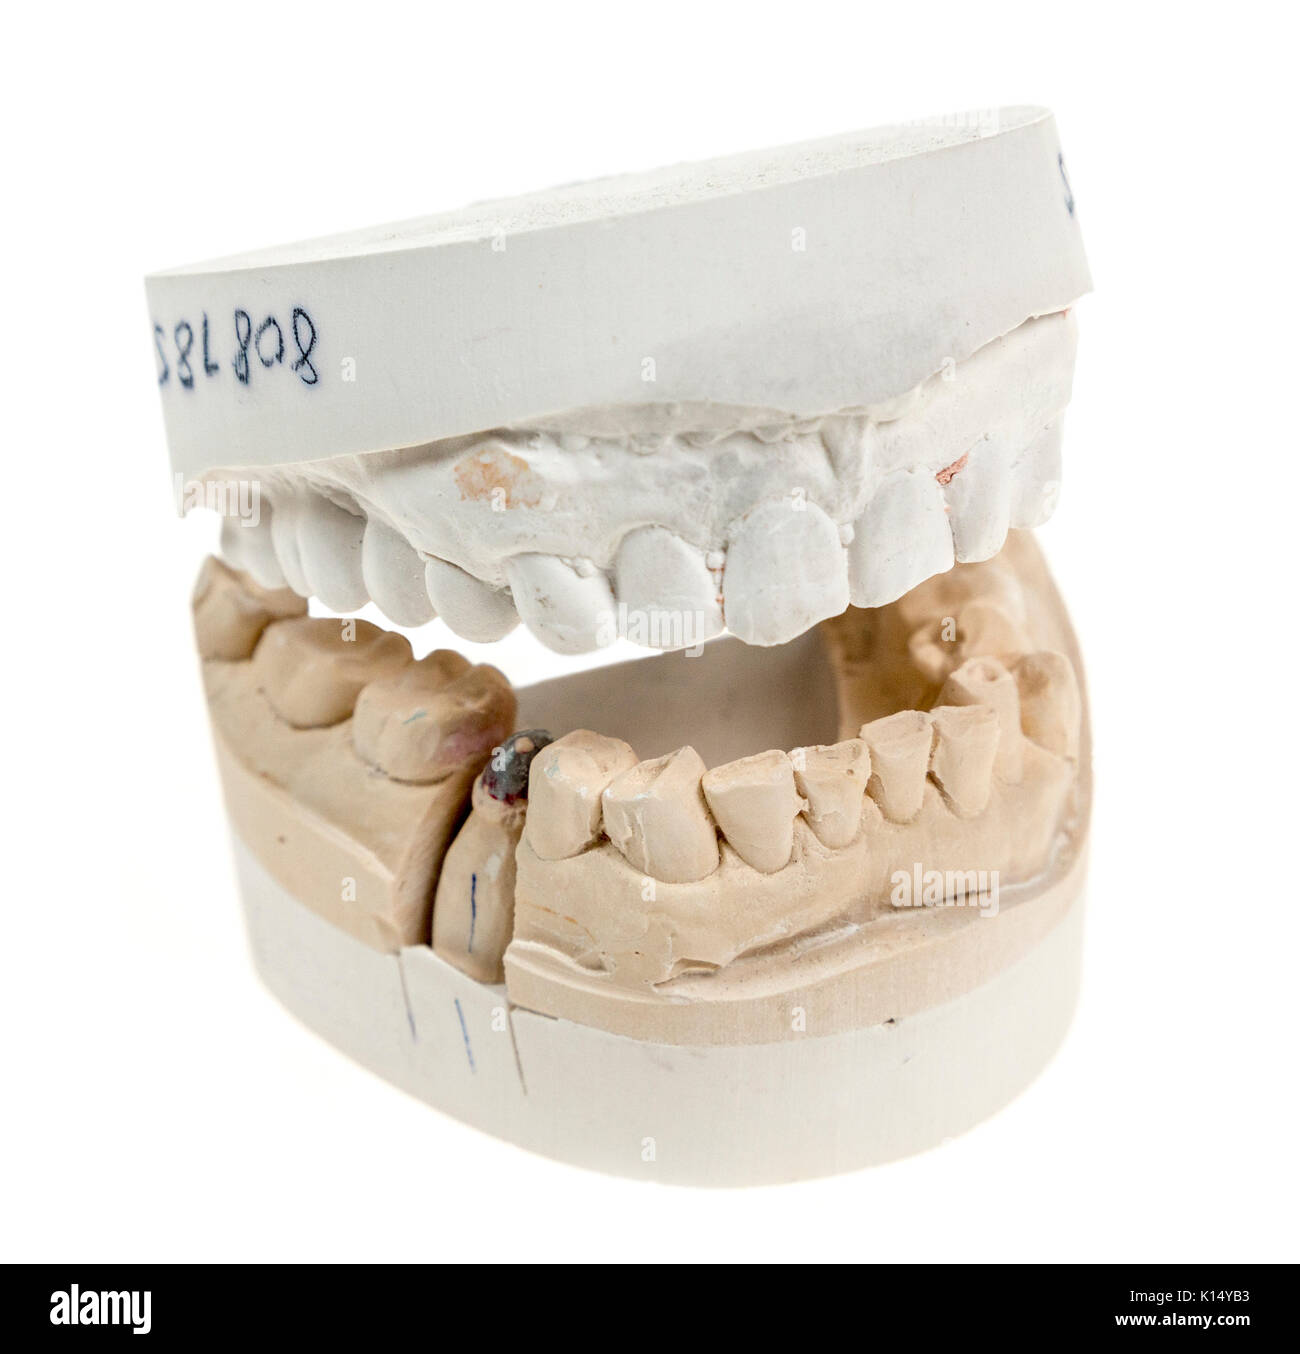 Dental procedure plaster cast mould of mouth and teeth as used to prepare a crown implant Stock Photo